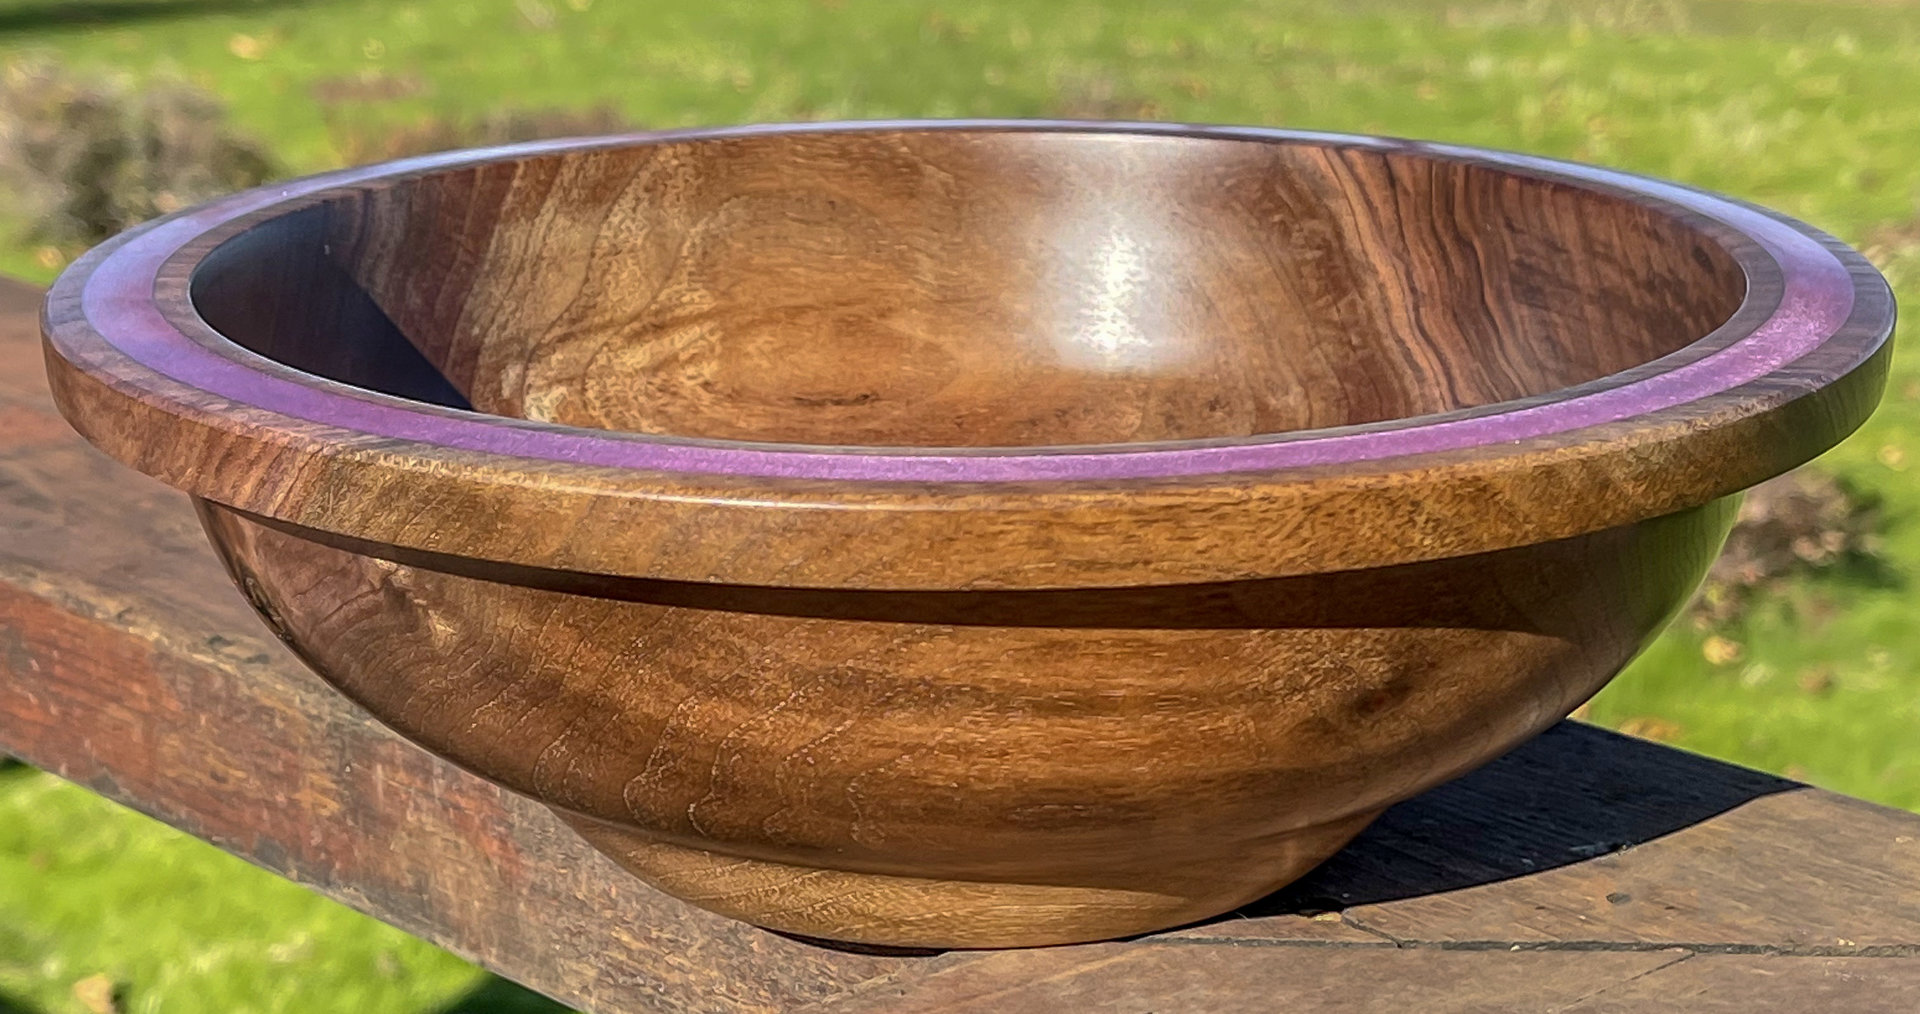 Walnut and resin bowl for friend with cancer